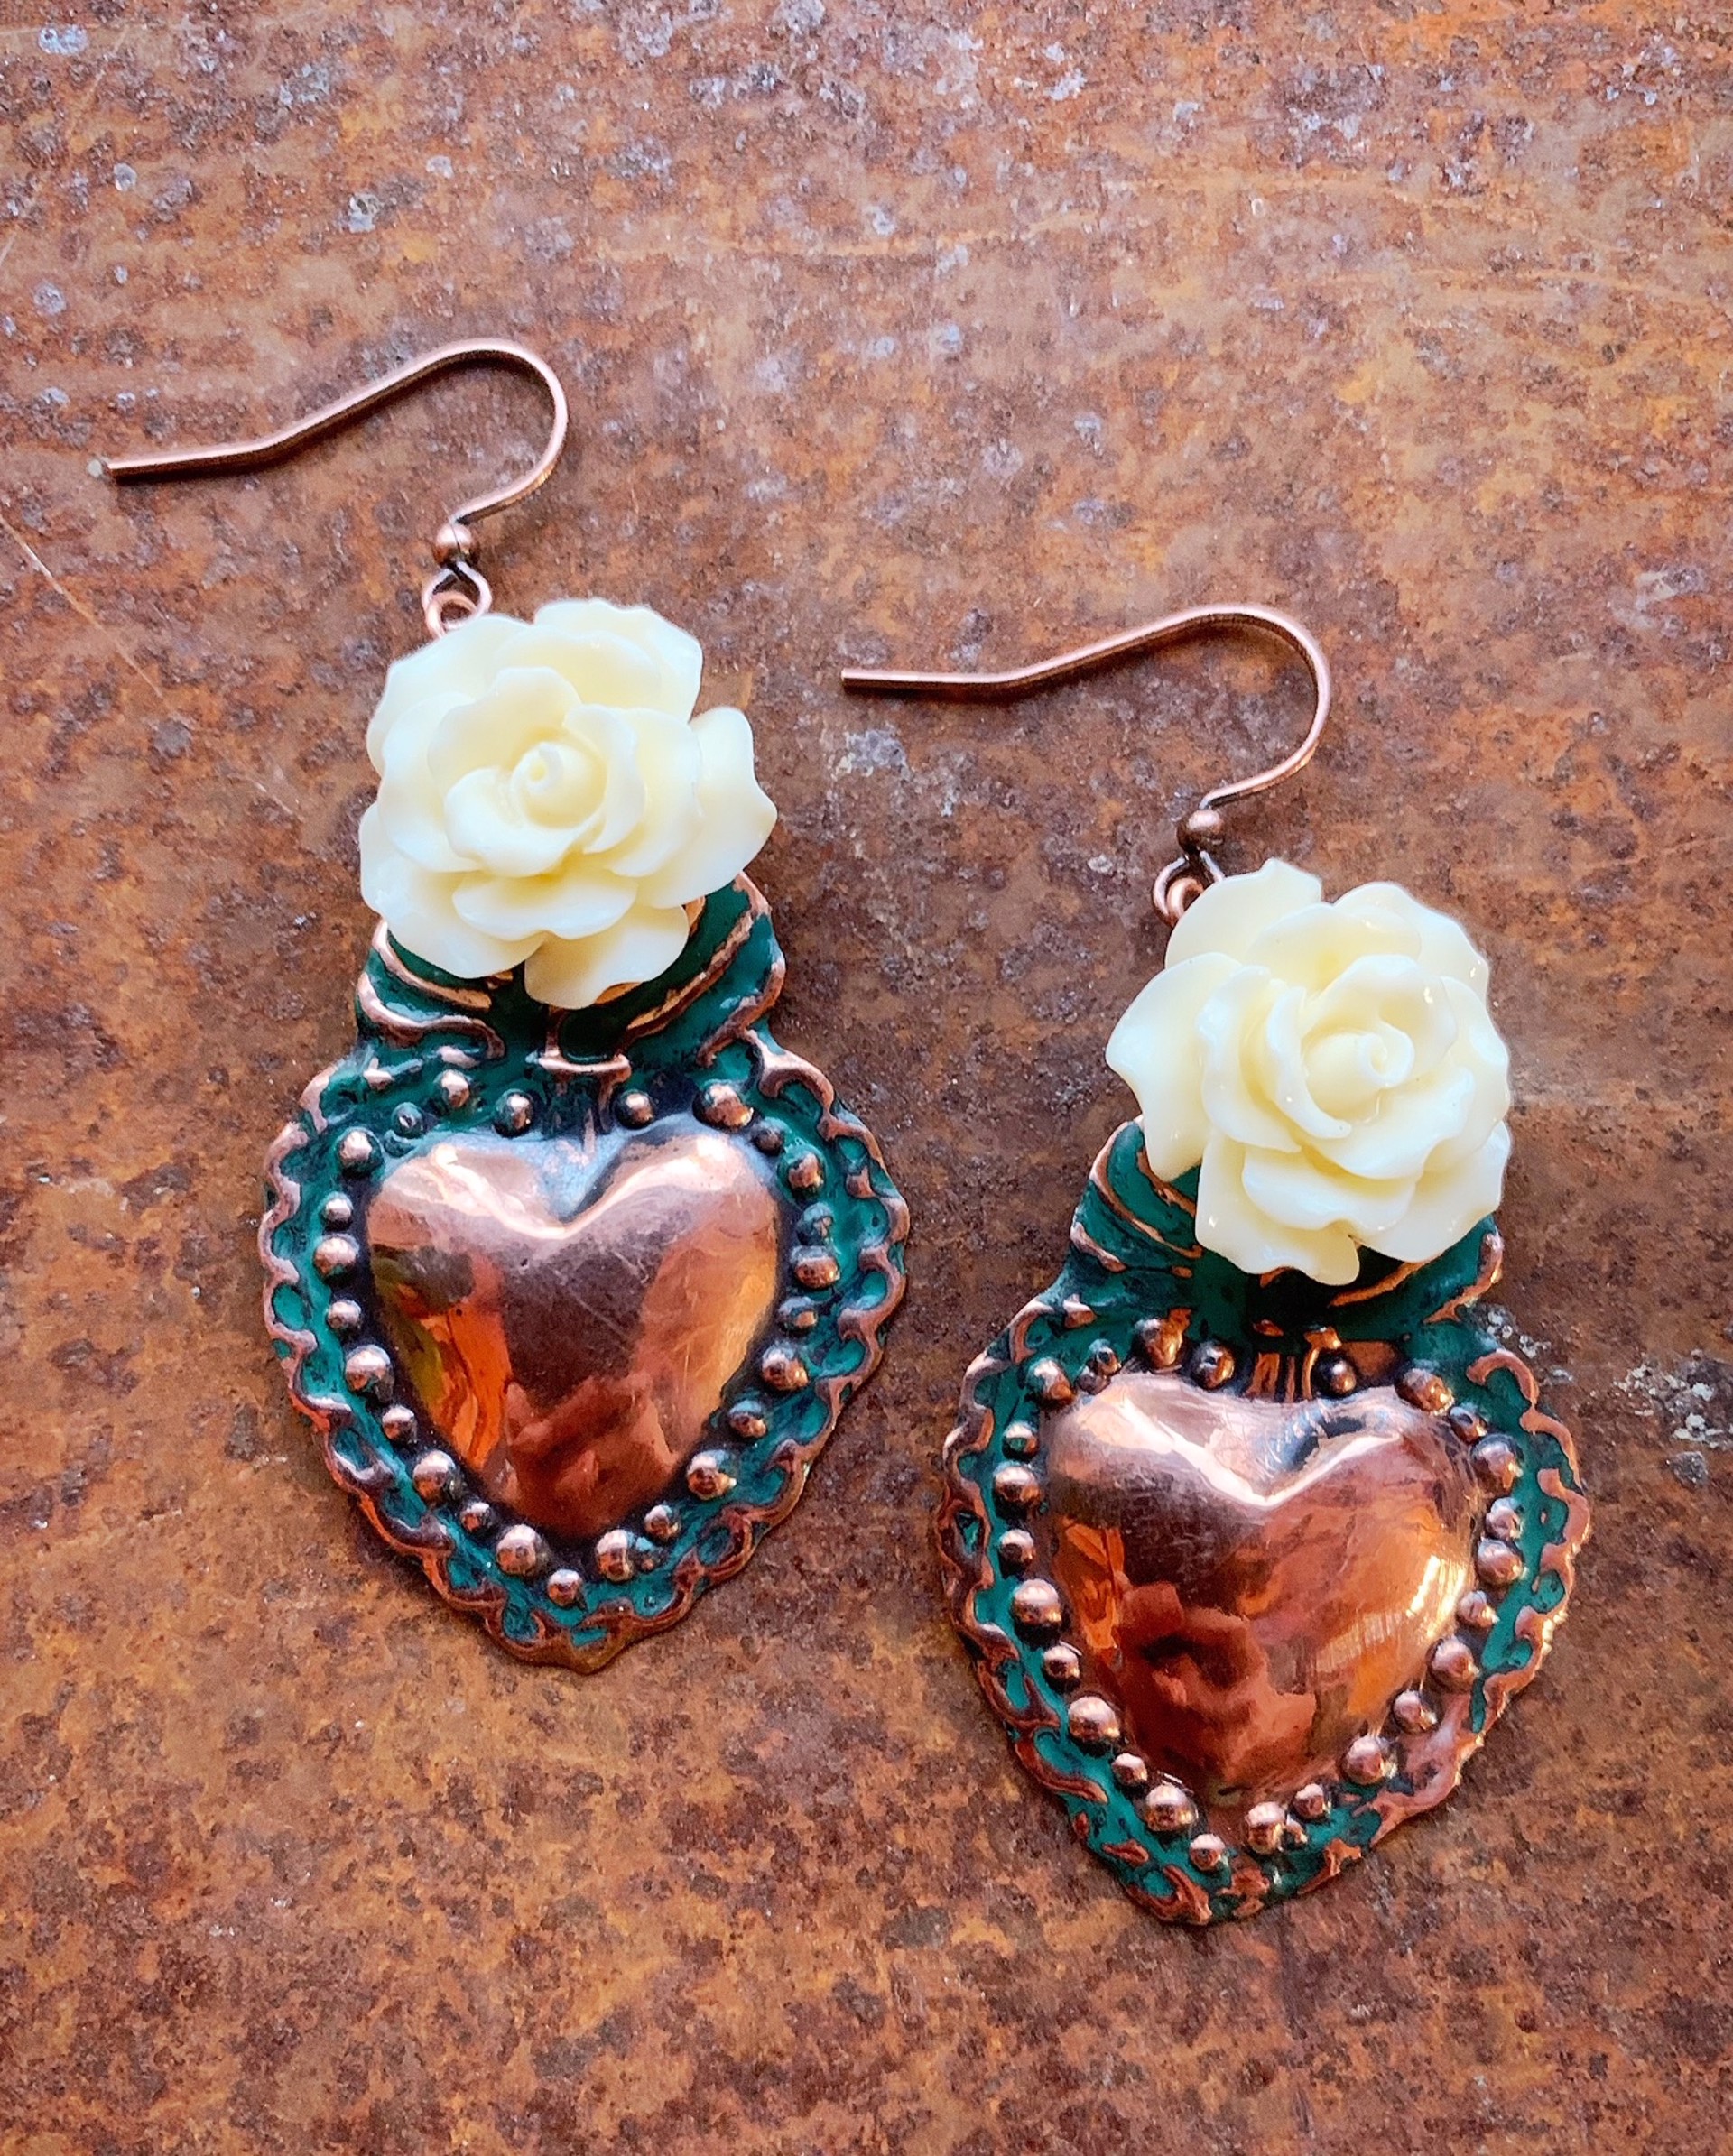 K793 Sacred Hearts with White Roses by Kelly Ormsby